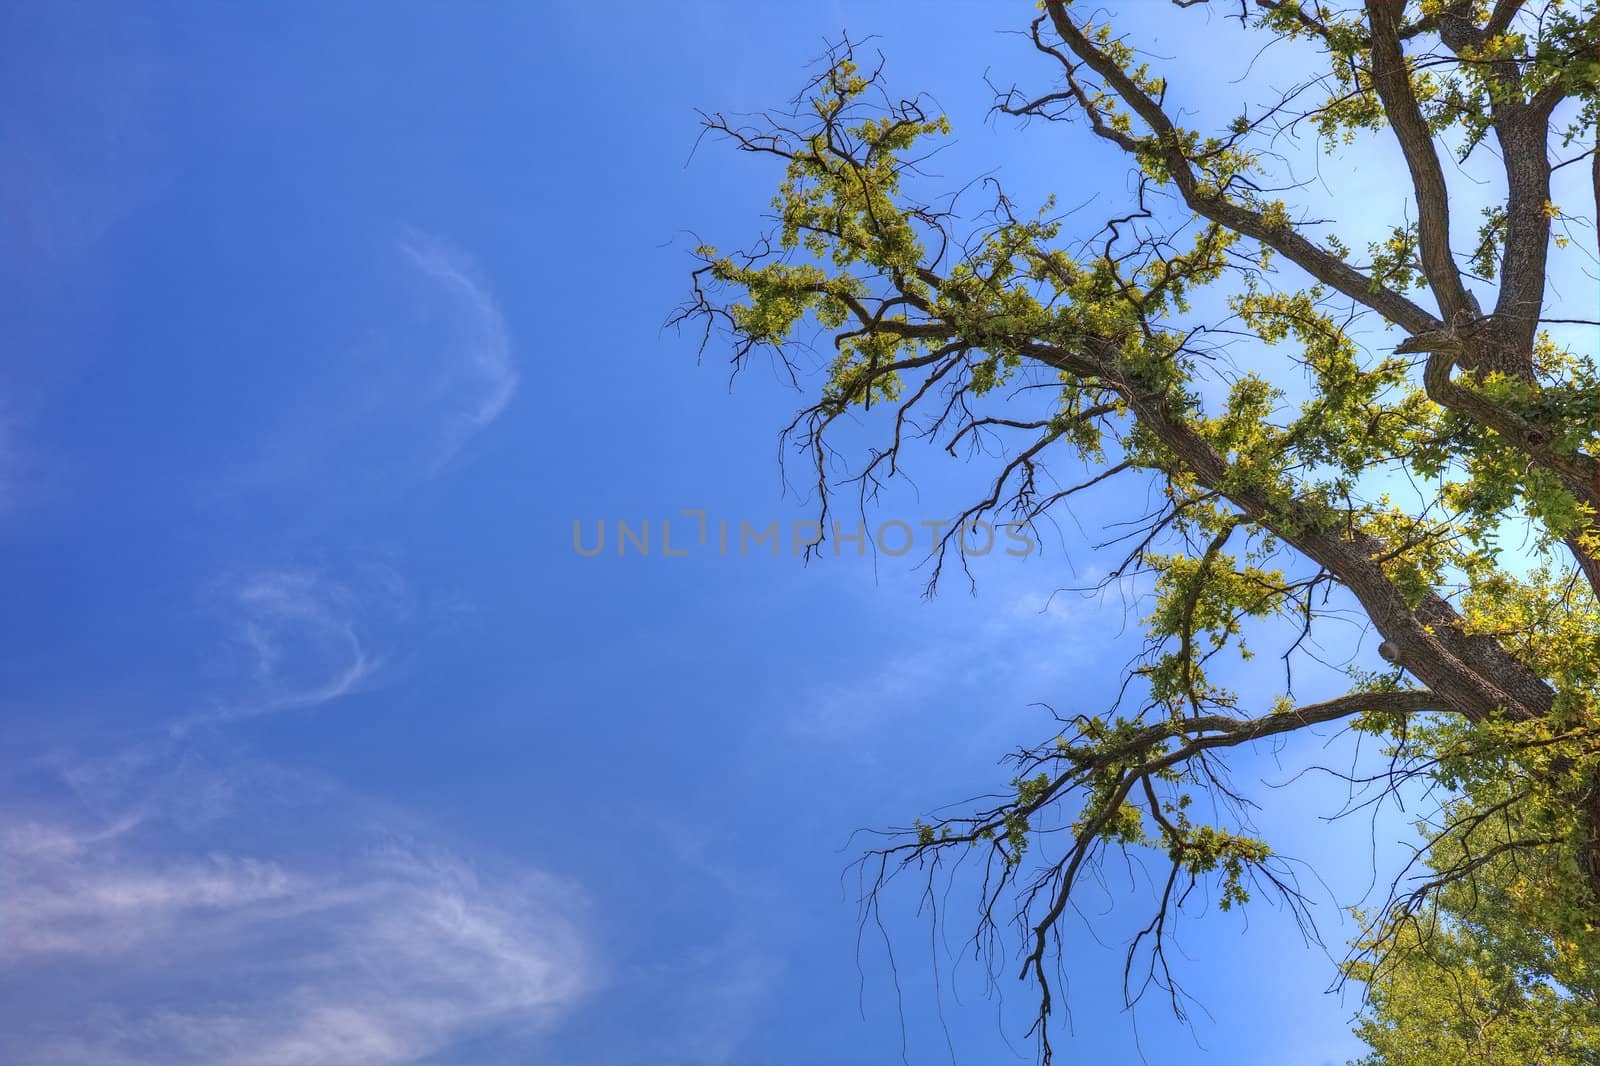 Old tree and sky as background with empty space for your design.